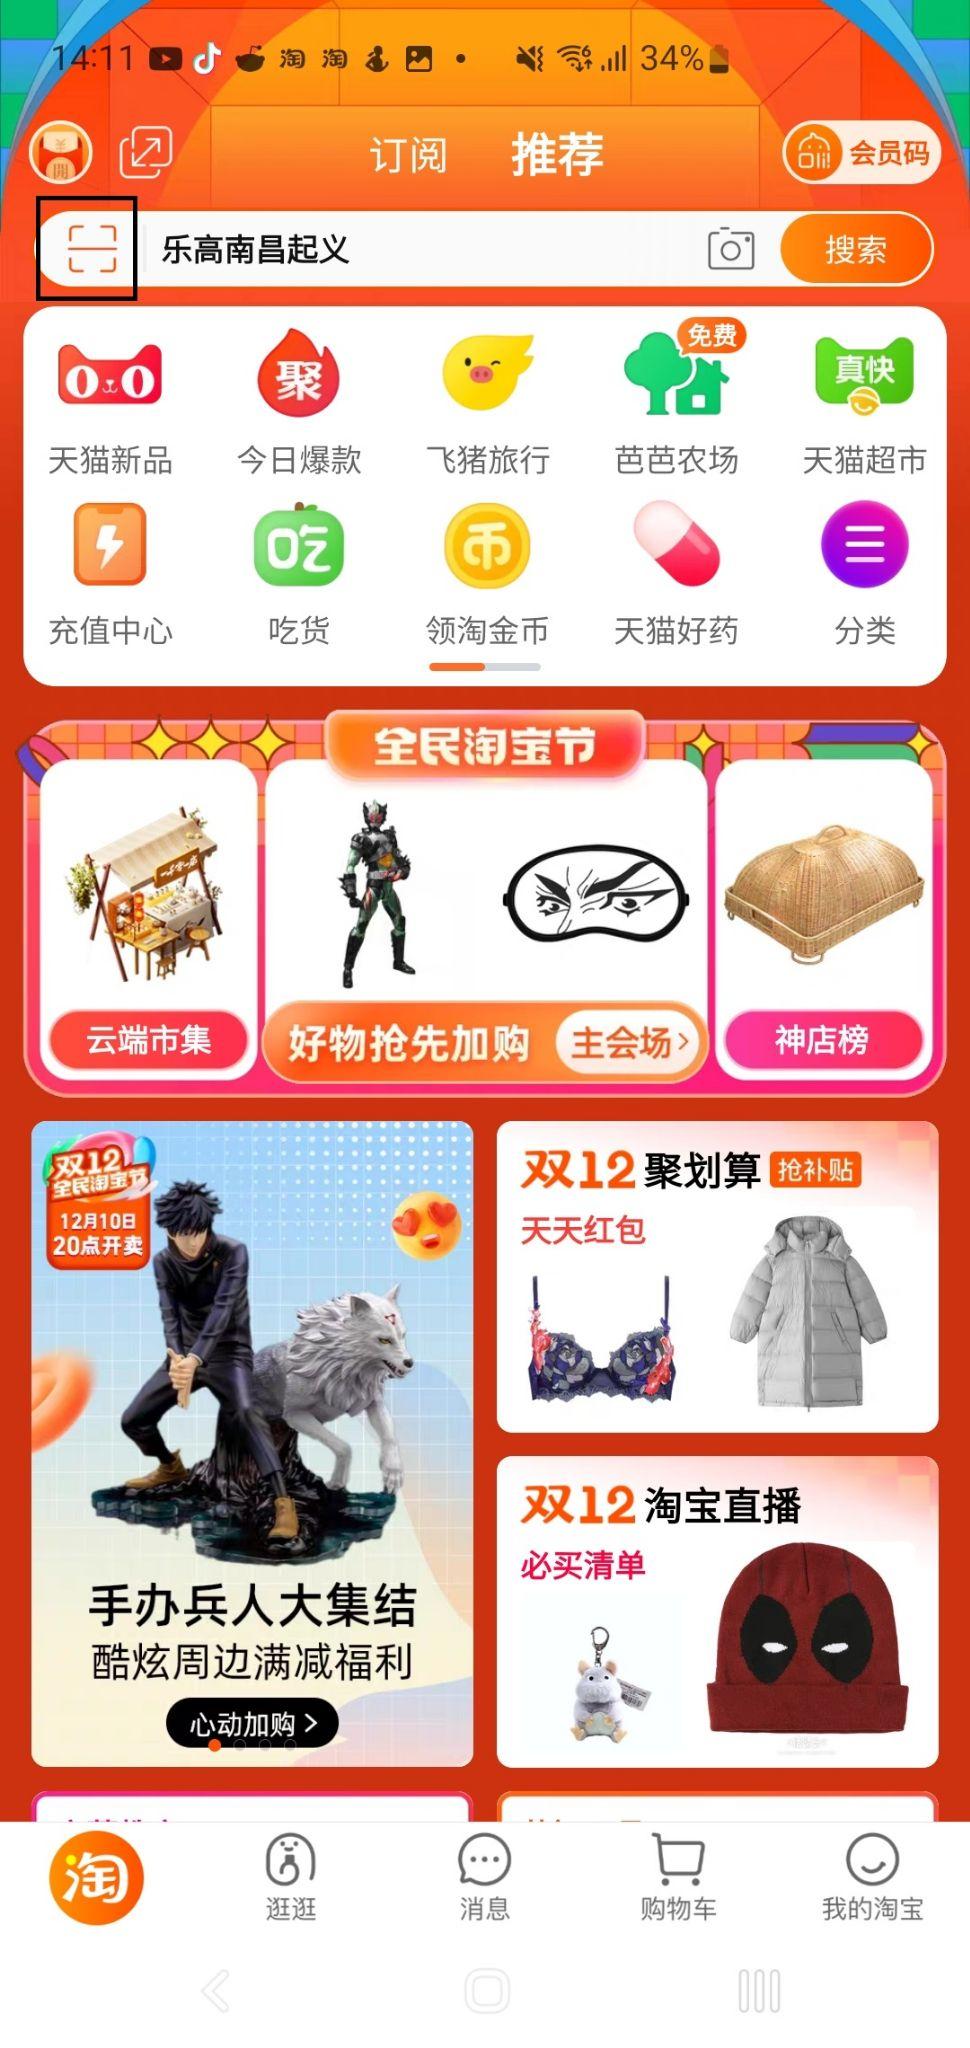 Exchange for coupon/voucher using Taobao coins